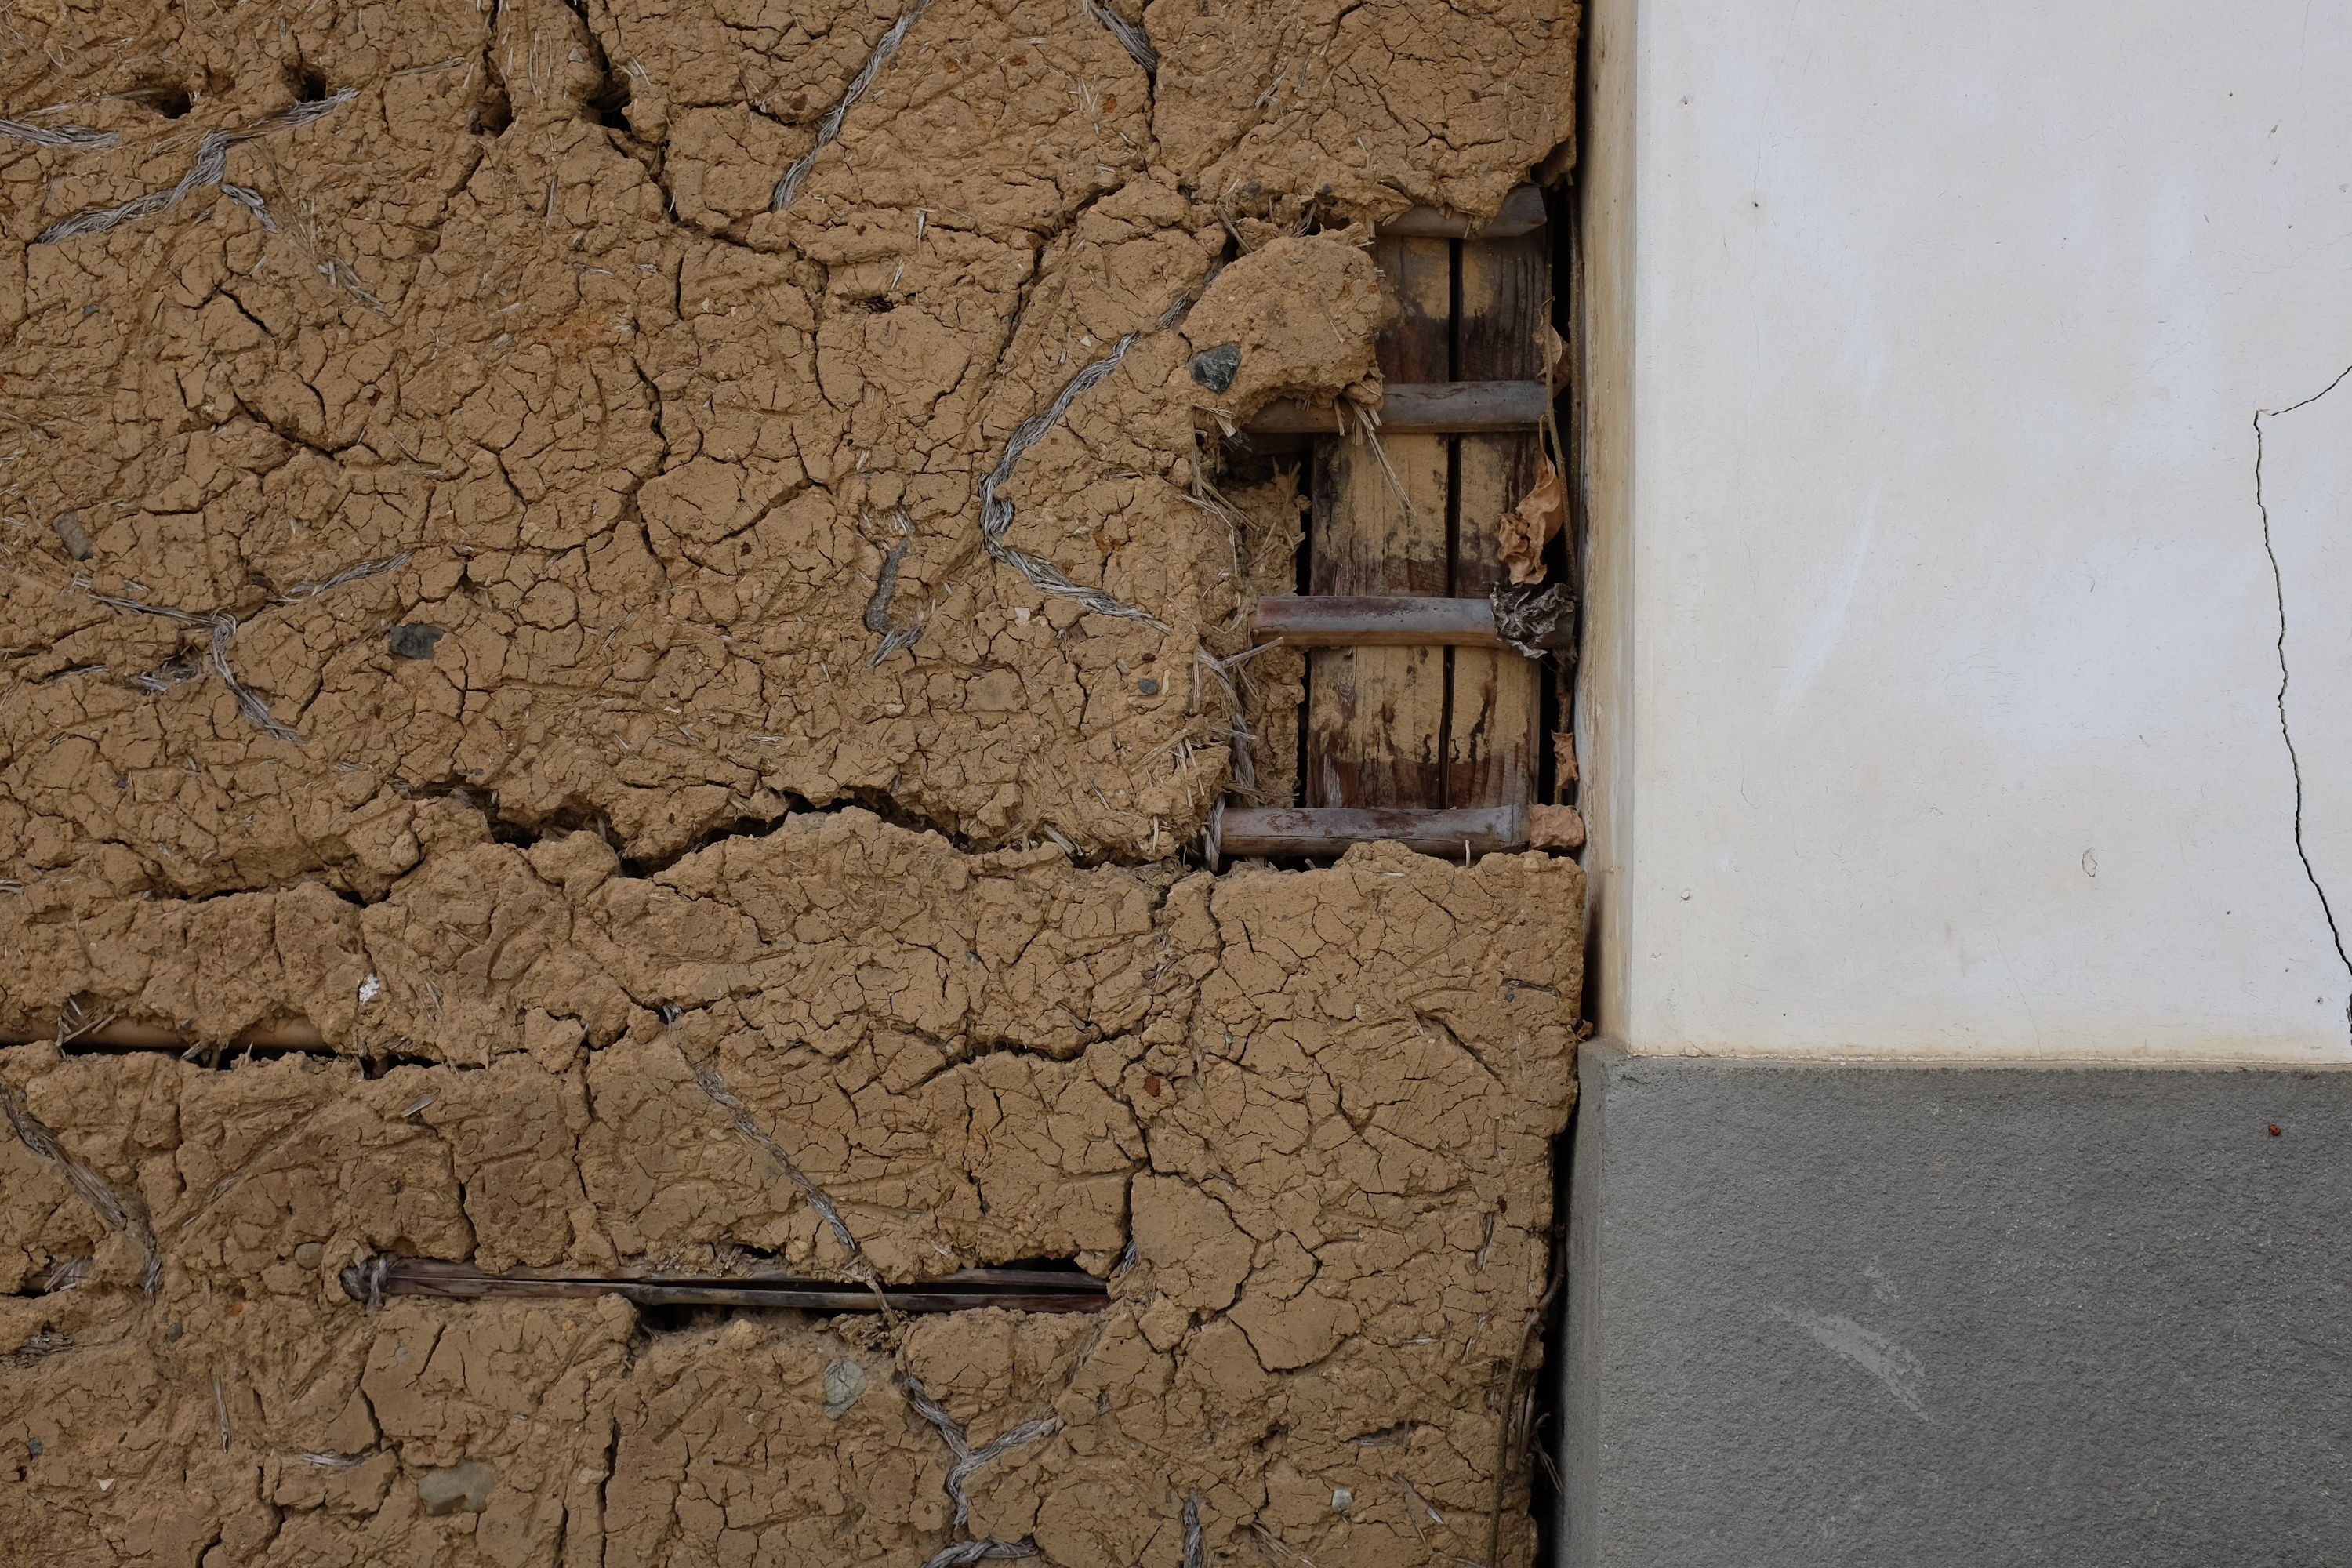 Detail of the mud wall of an old Japanese storehouse.